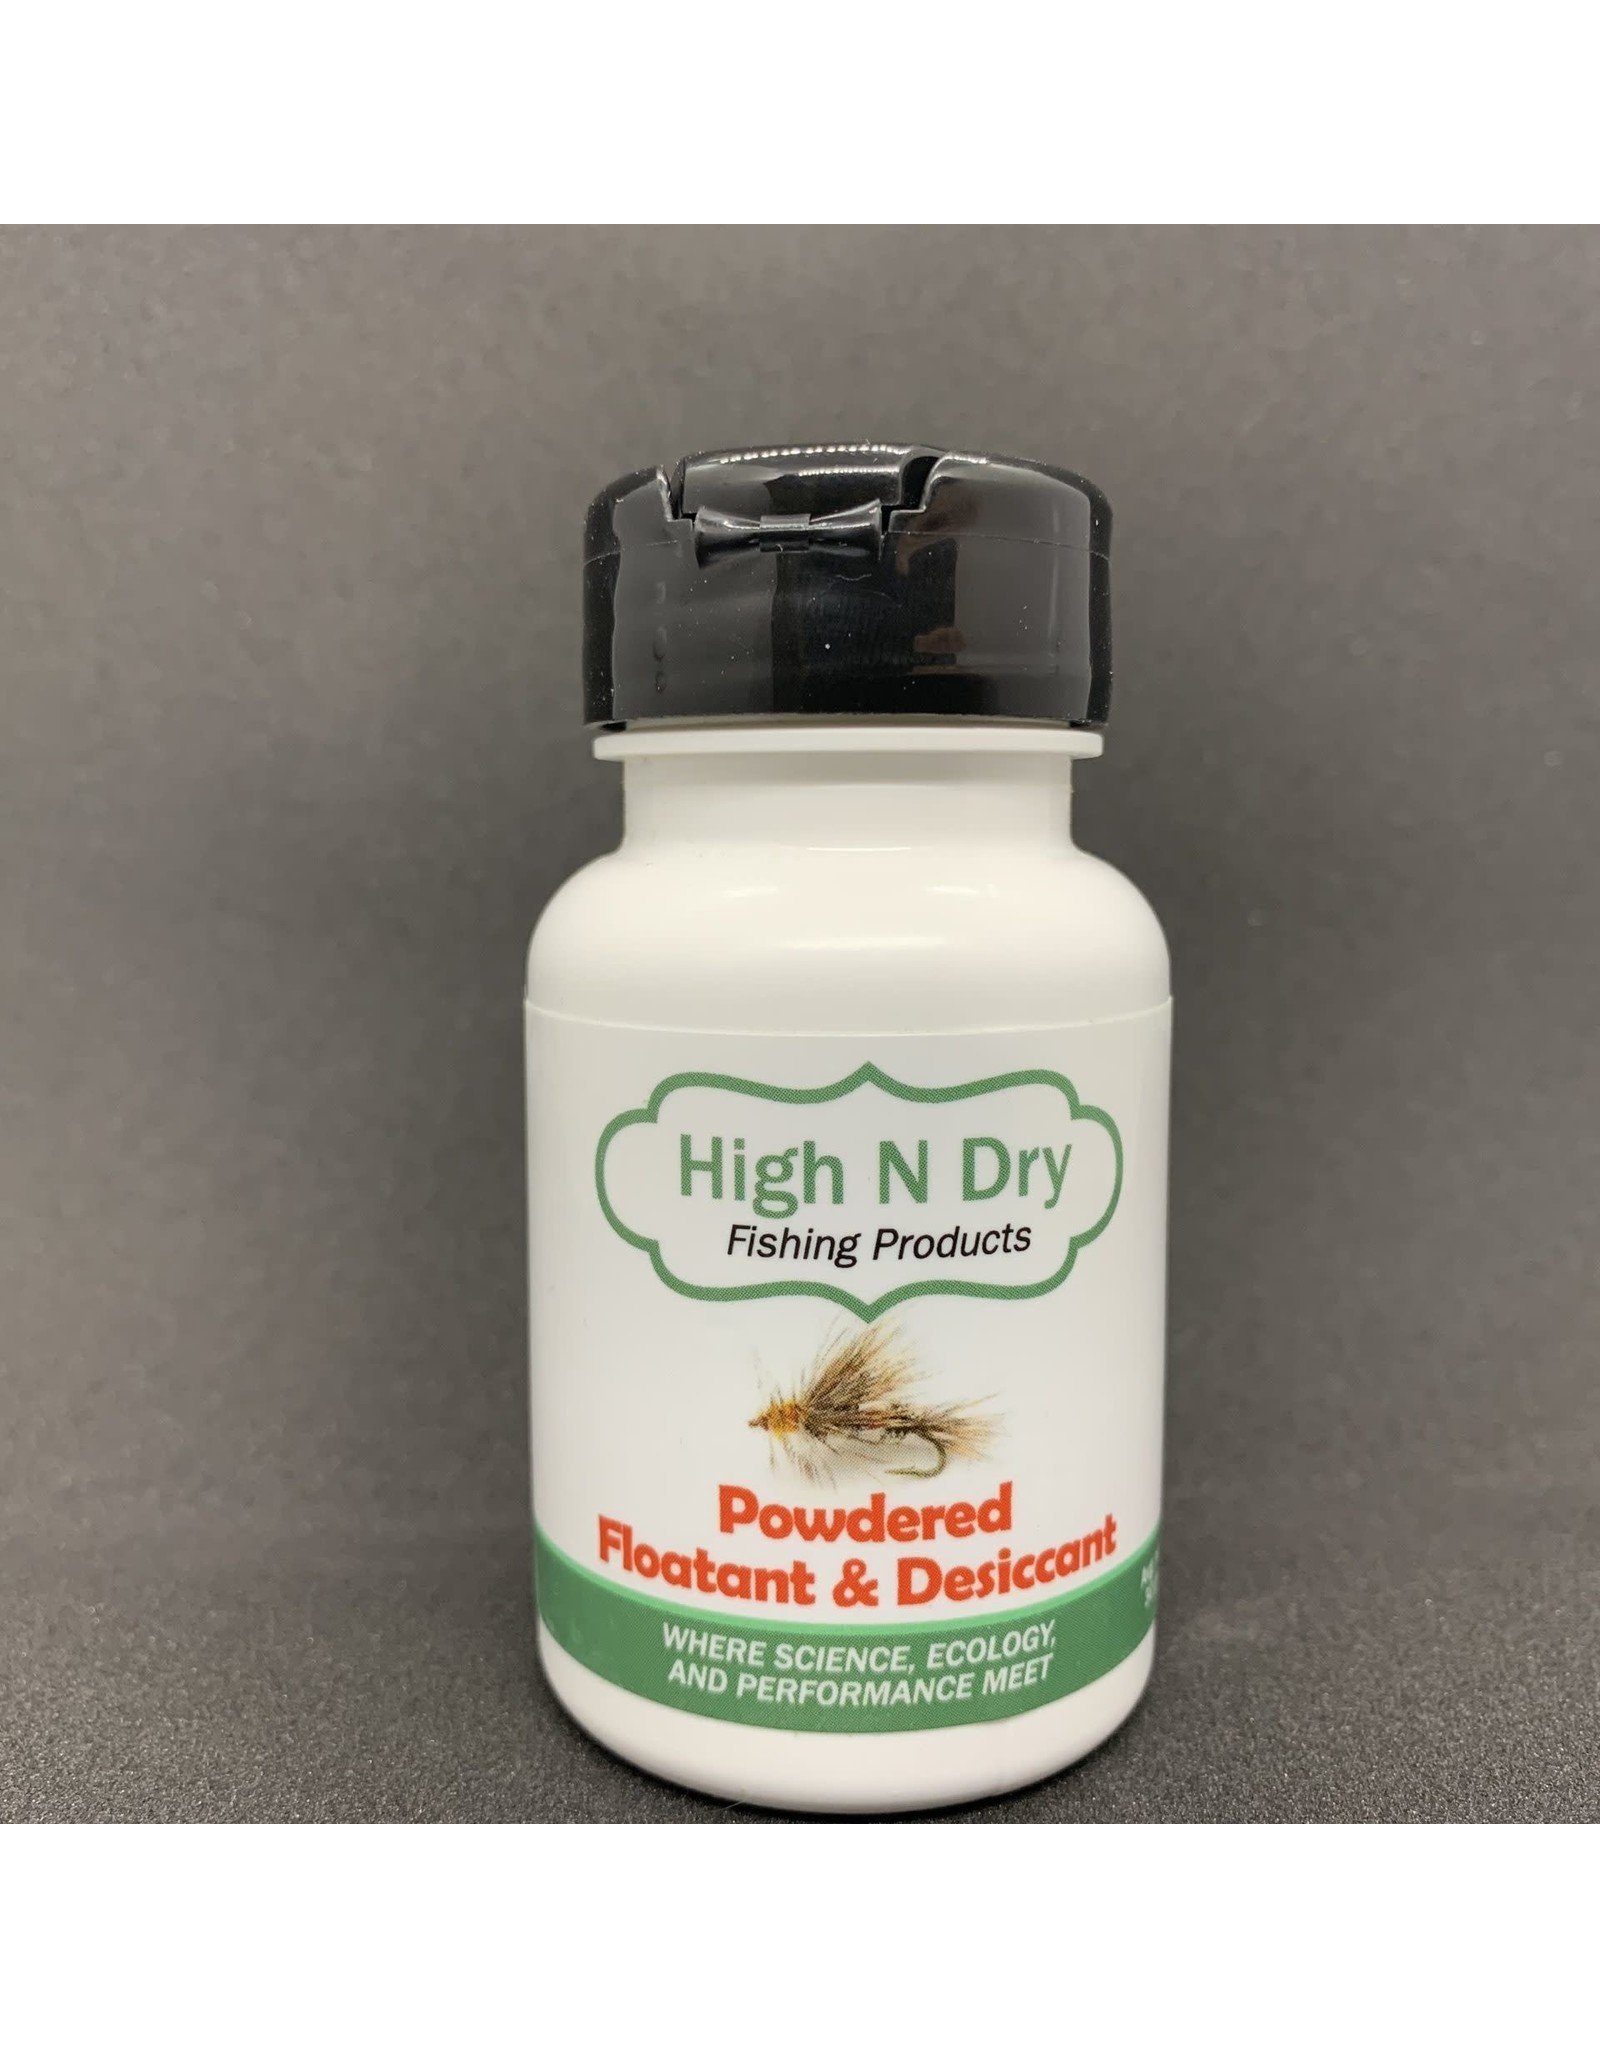 HIGH N DRY POWDERED FLOATANT & DESICCANT - Kootenay Fly Shop